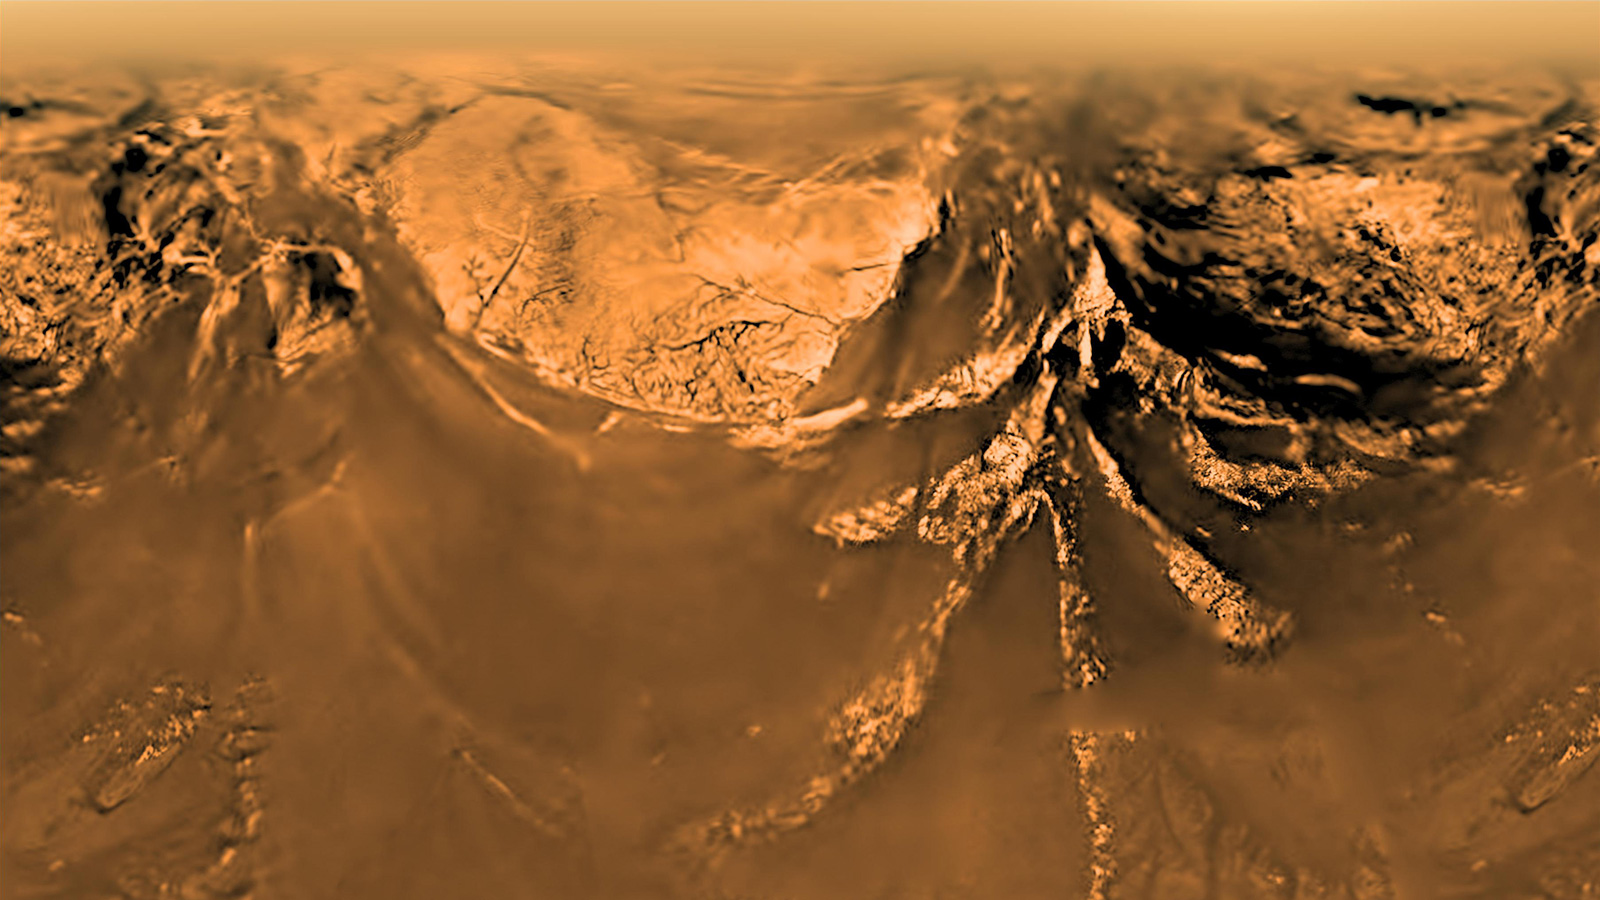 Mosaic of images taken by Huygens during its descent to the surface of Titan, from an altitude of about 6 miles (10 kilometers). Image Credit: ESA/NASA/JPL/University of Arizona